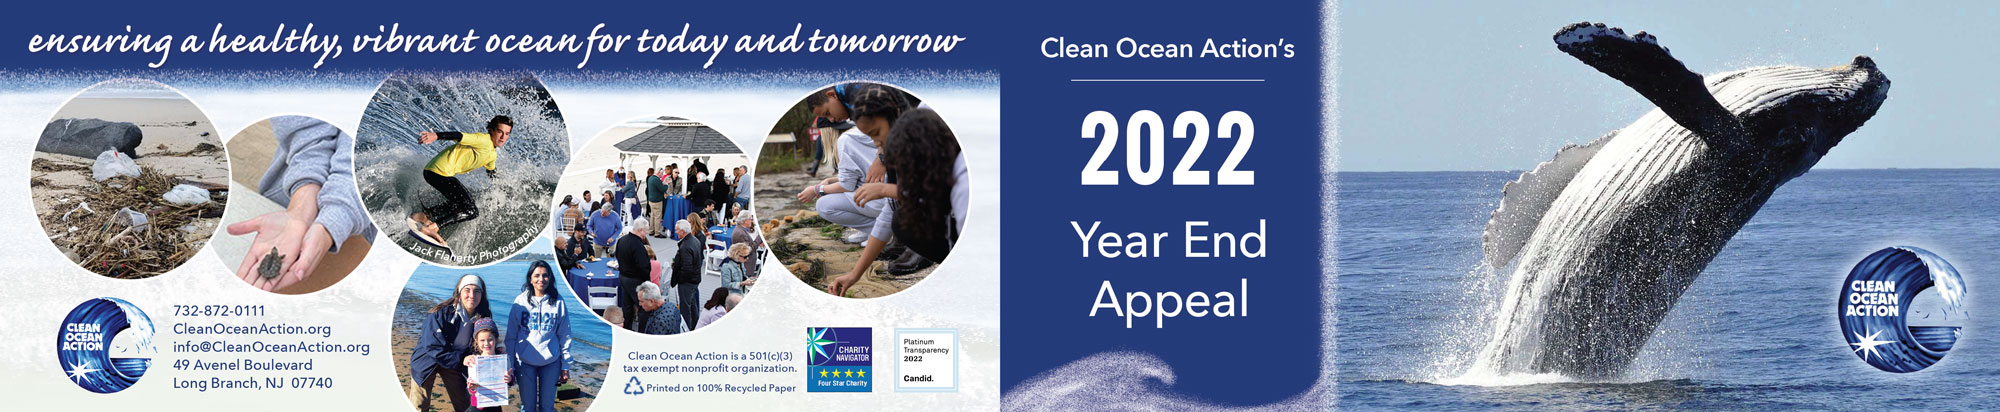 Clean Ocean Action Annual Appeal 2022_Outside